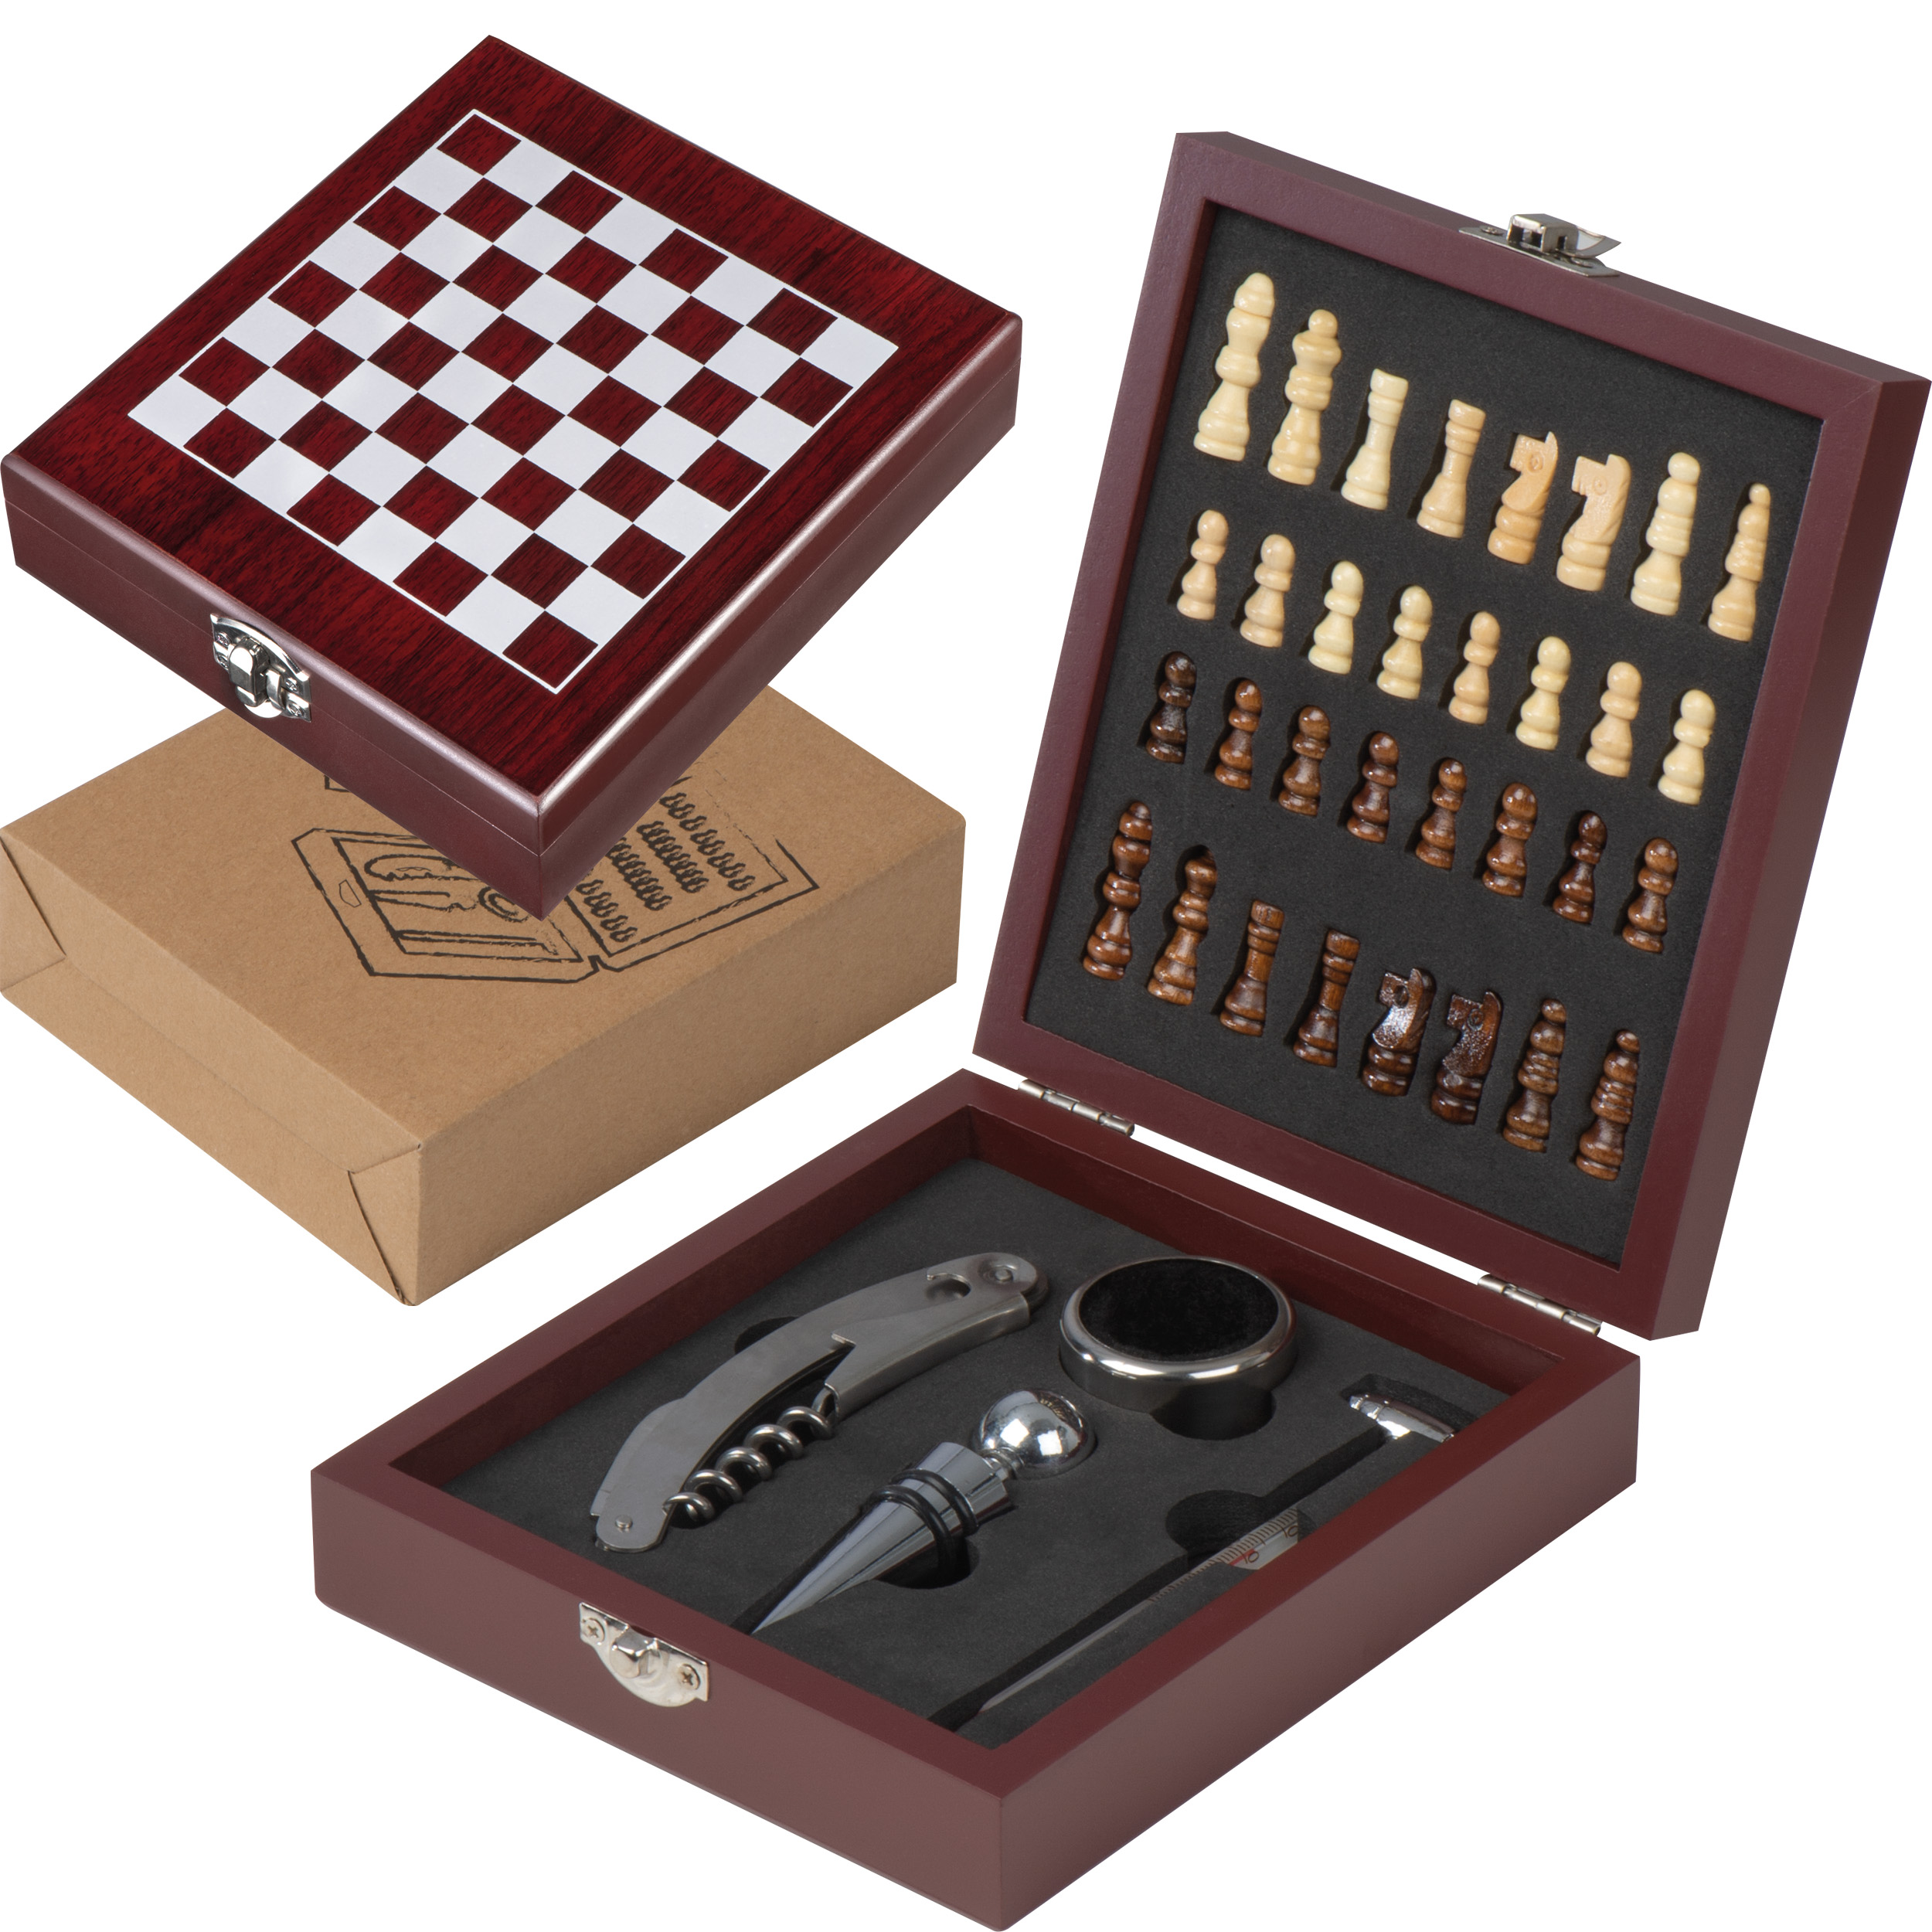 A chess set made of wood with a design influenced by wine - Eton